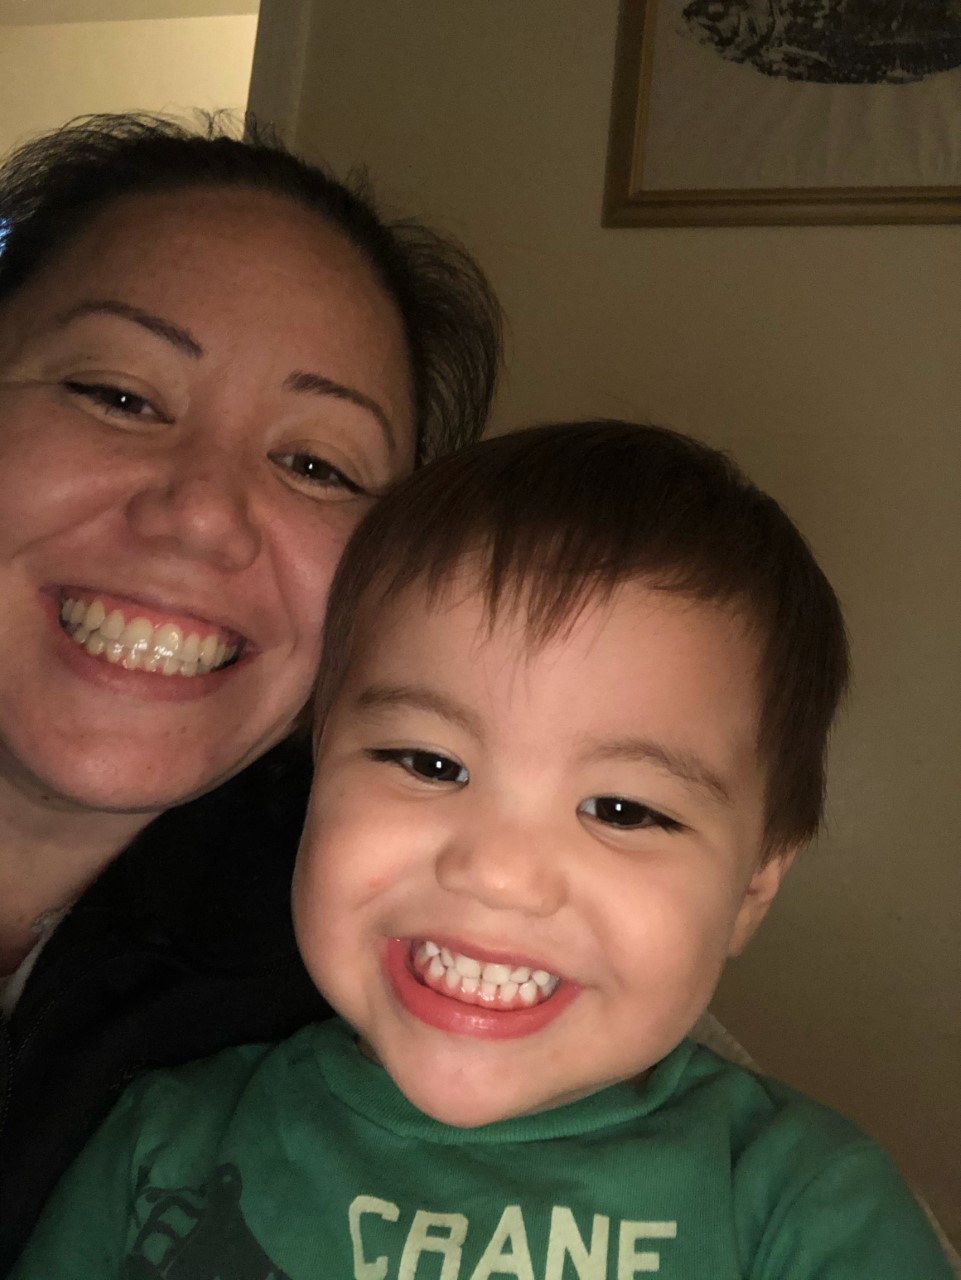 Photo of Otome Lindsey, a smiling white woman smiling with her son